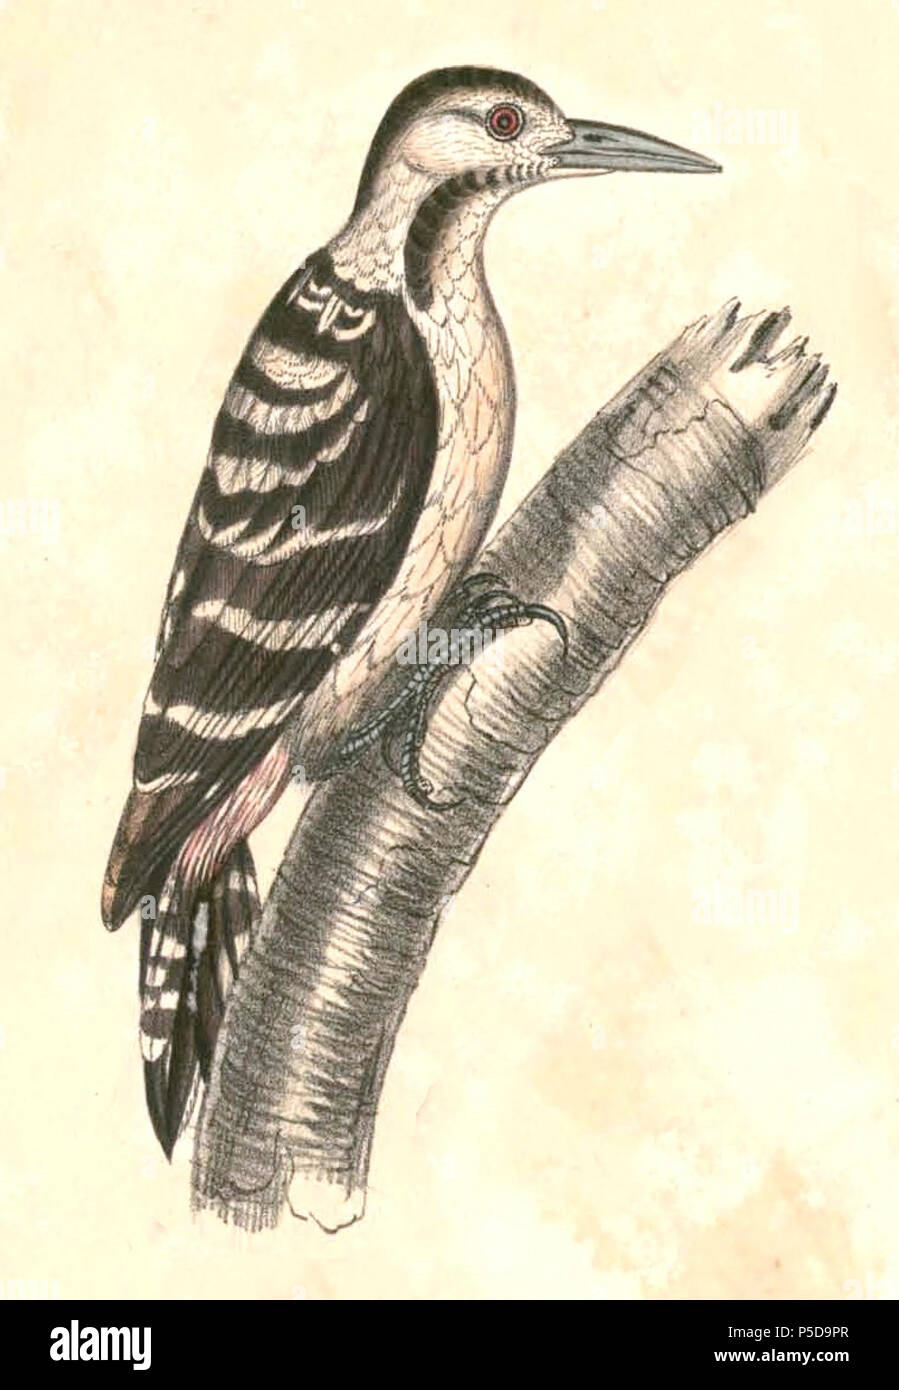 N/A.  English: « Picus macei » = Dendrocopos macei (Fulvous-breasted Woodpecker) - female Français: « Picus macei » = Dendrocopos macei (Pic de Macé) - femelle . between 1830 and 1832.   Thomas Hardwicke  (1755–1835)     Alternative names Hardw.  Description English soldier and naturalist  Date of birth/death 1755 3 May 1835  Location of birth/death London Borough of Lambeth  Authority control  : Q2543258 VIAF:308180676 ISNI:0000 0004 3350 0810 LCCN:nb2013018703 Botanist:Hardw. SUDOC:183009134 WorldCat 435 Dendrocopos macei Hardwicke - female Stock Photo